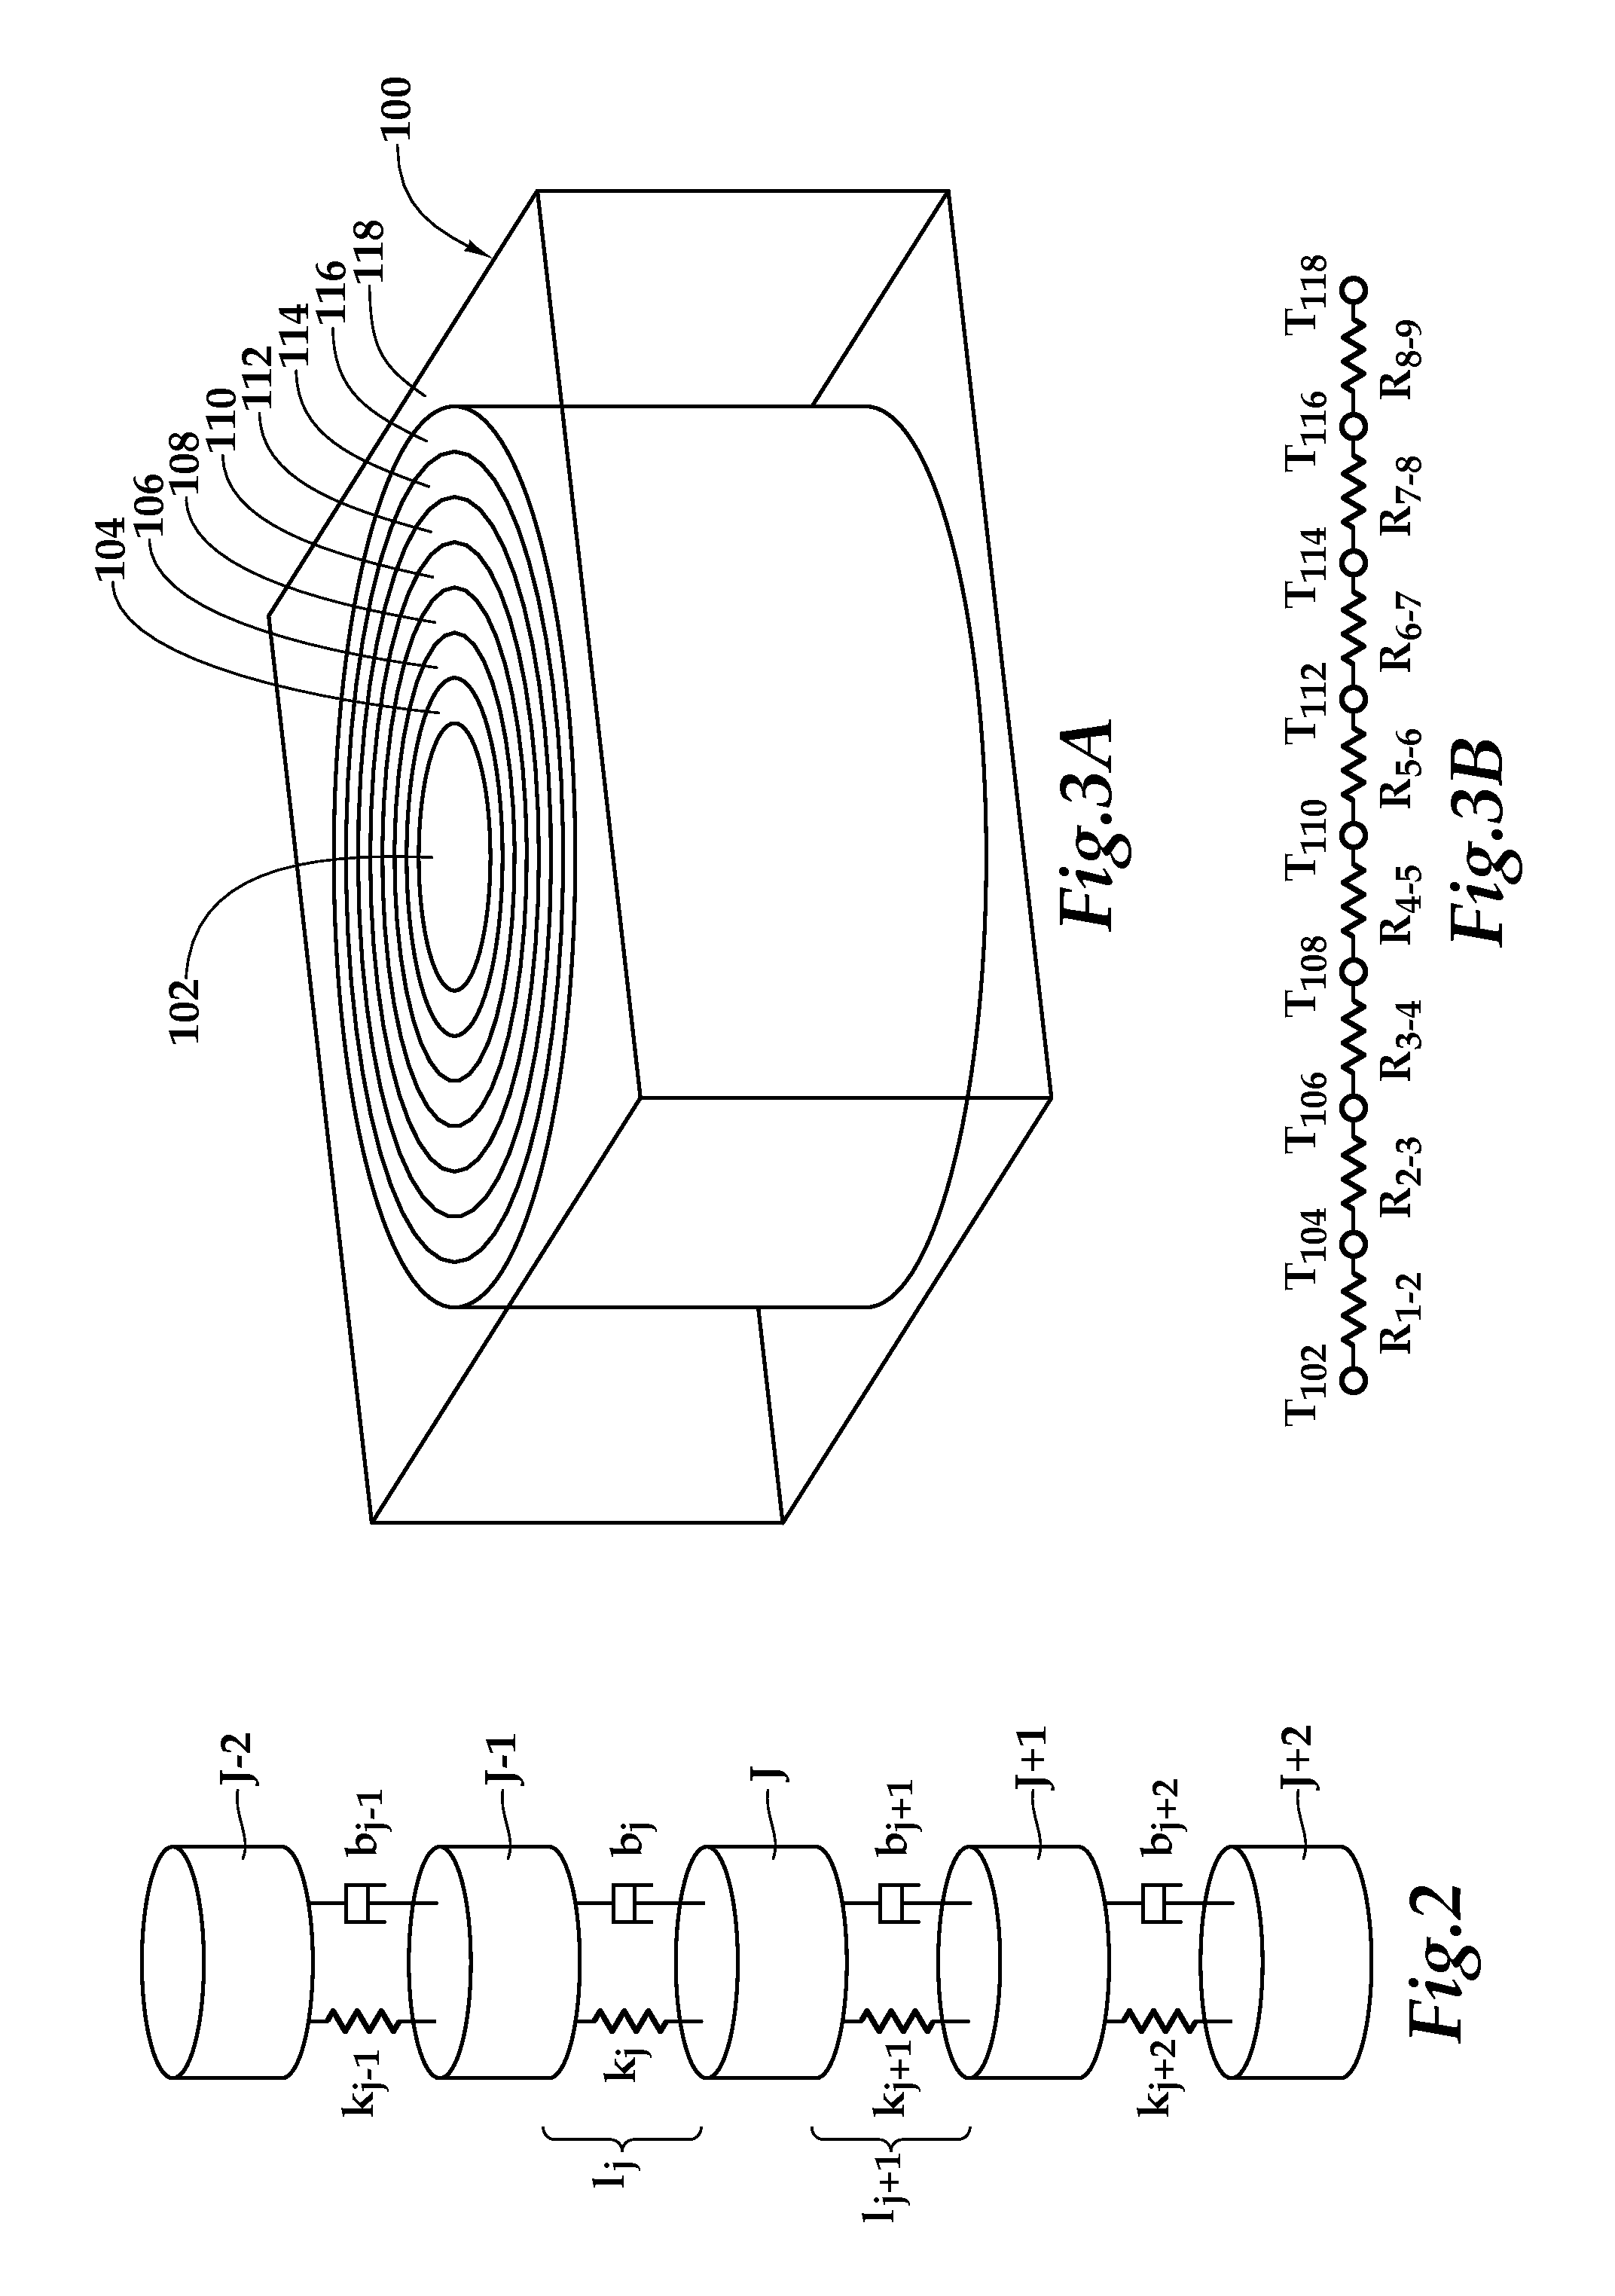 System and method for completion optimization